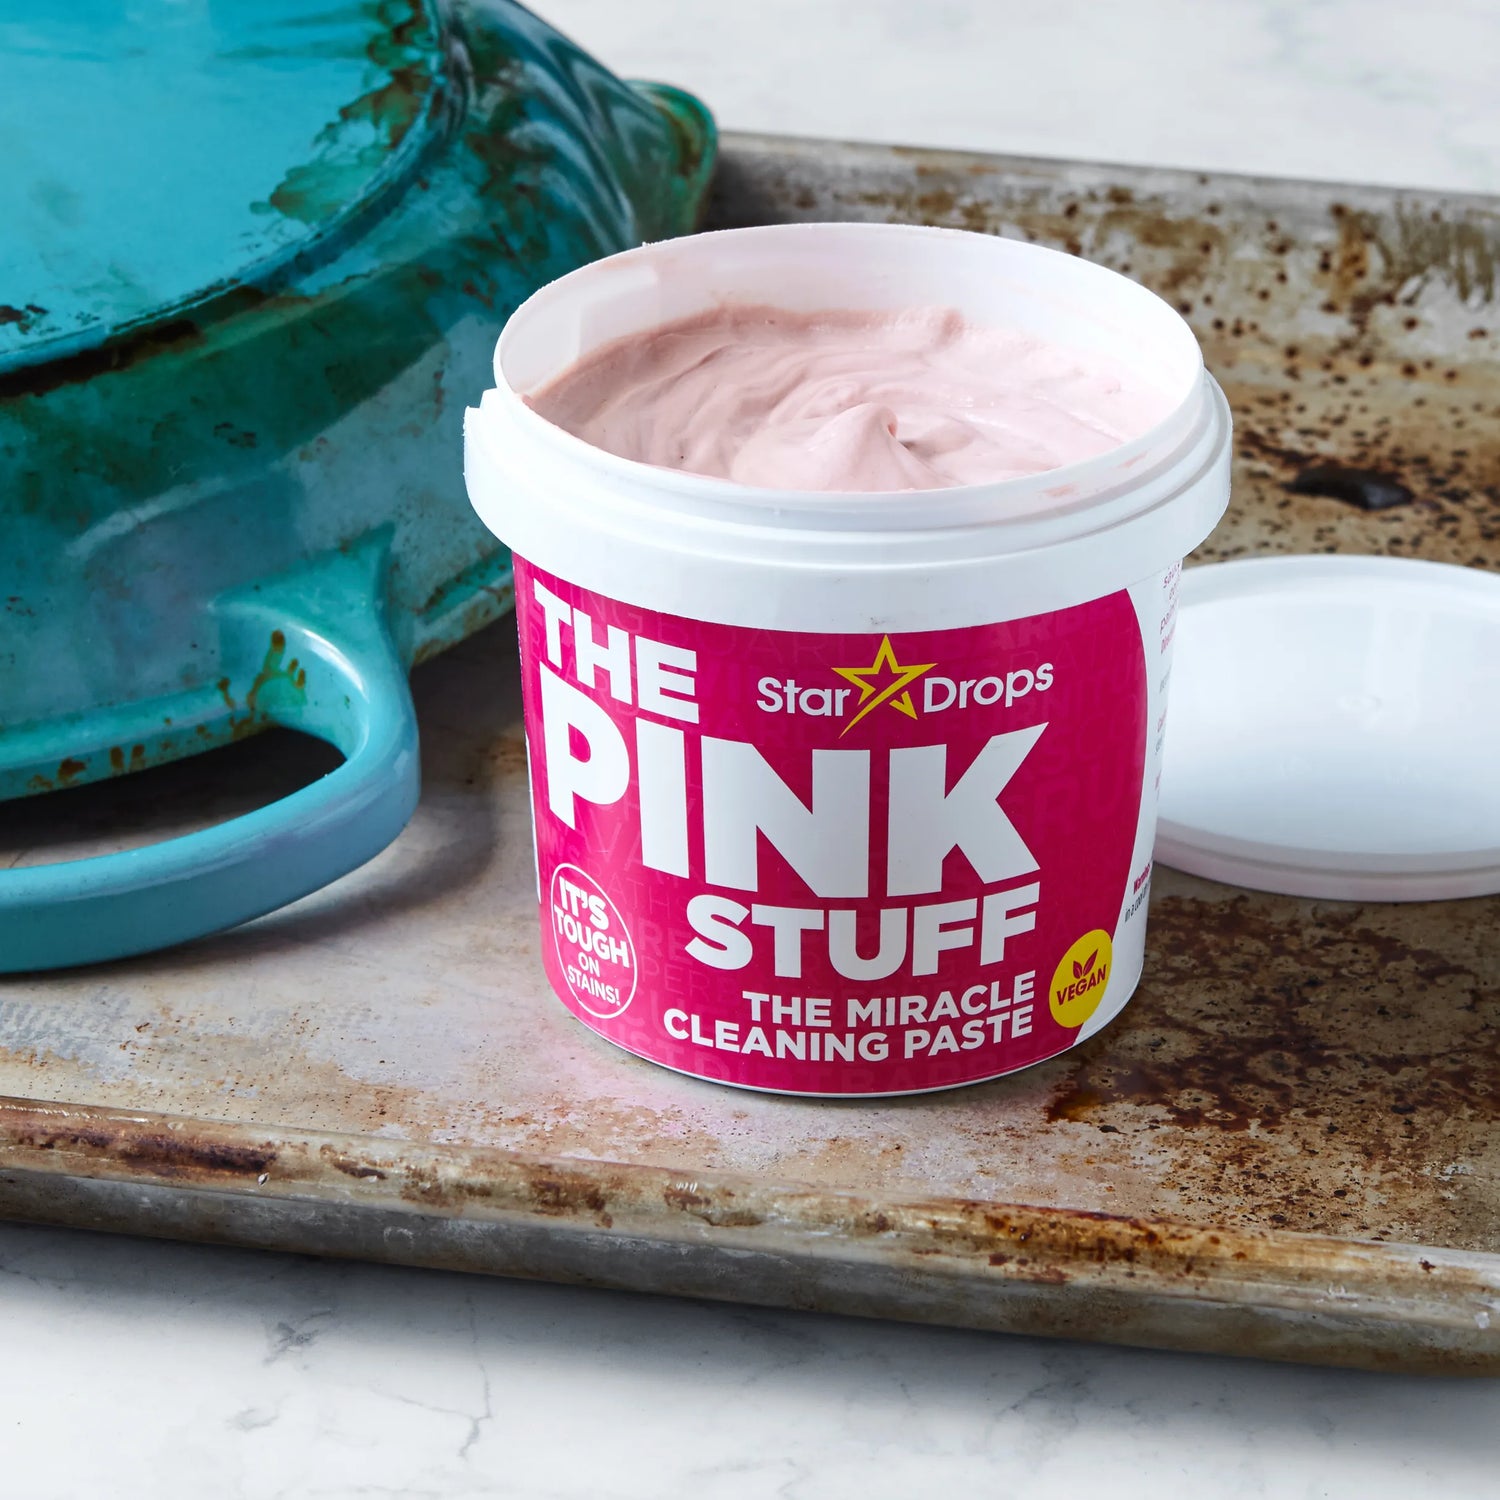 Check out this ✨satisfying✨ floor scrub featuring our The Pink Stuff A, Floor Cleaning